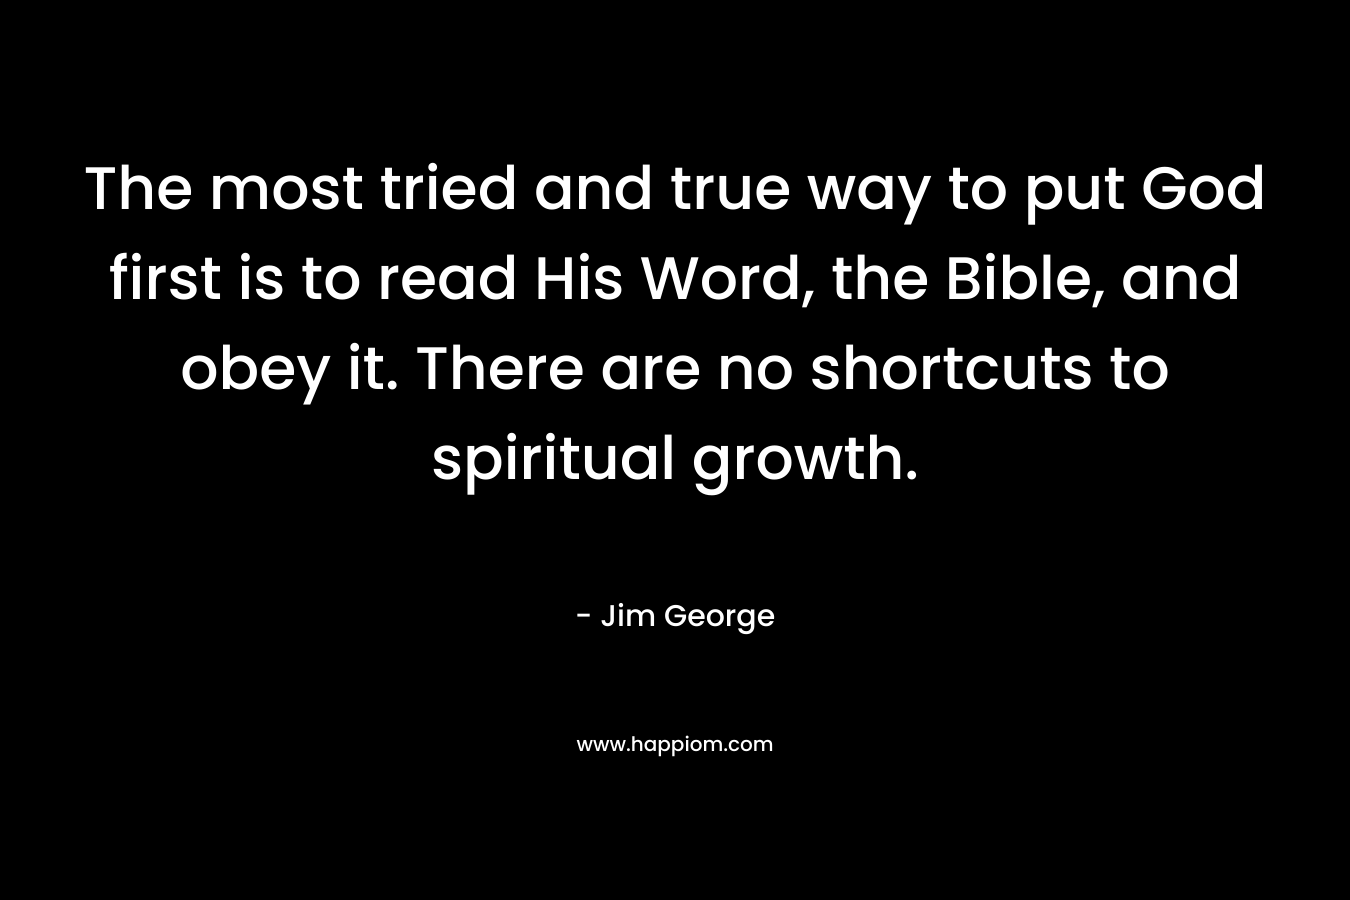 The most tried and true way to put God first is to read His Word, the Bible, and obey it. There are no shortcuts to spiritual growth.